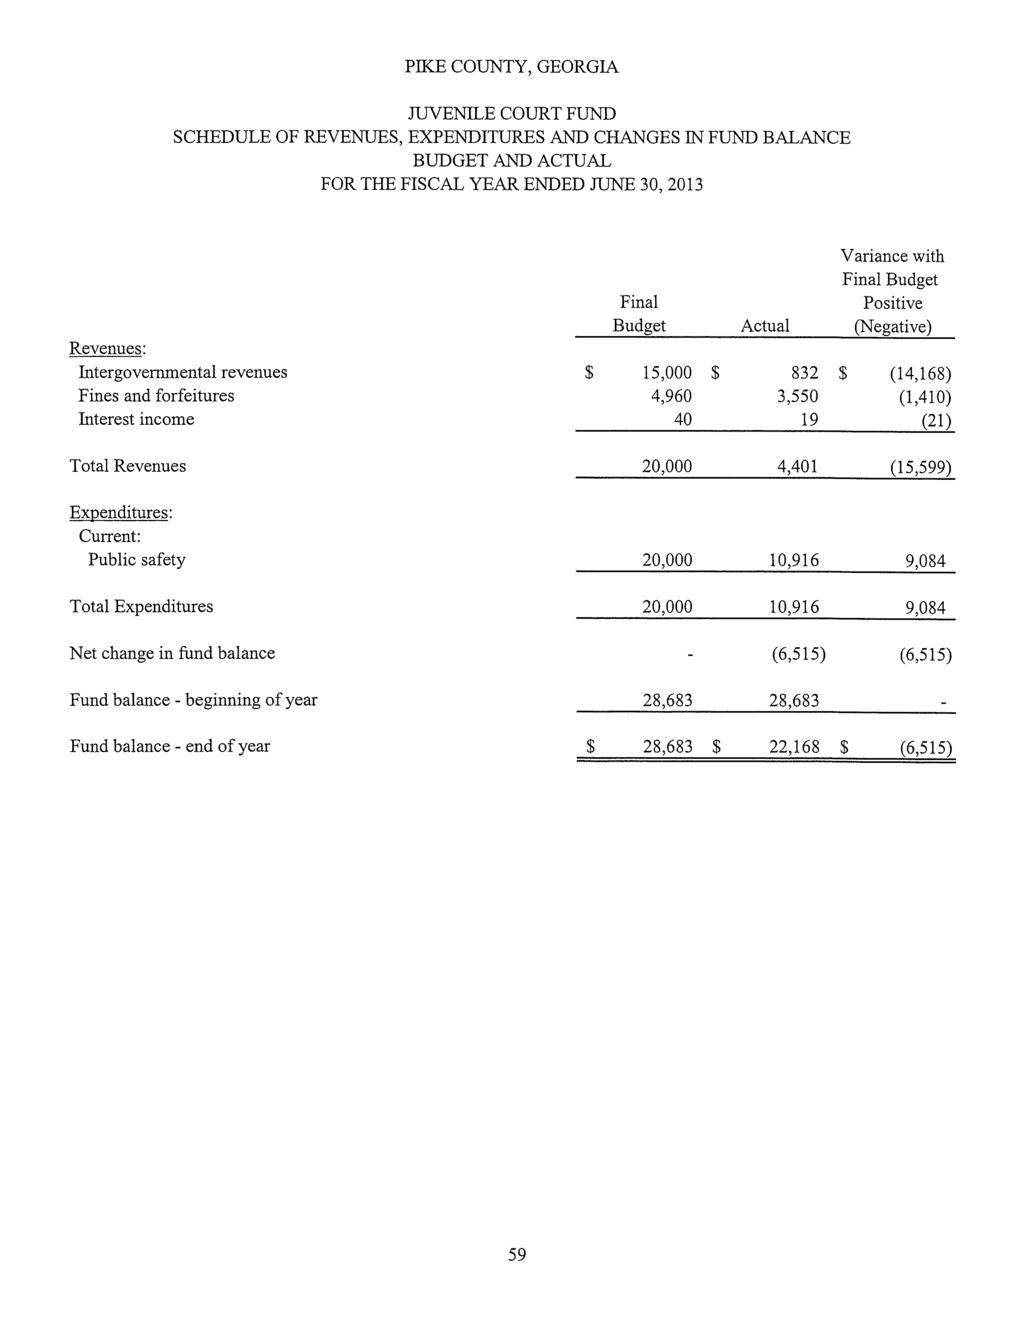 Pll(E COUNTY, GEORGIA JUVENILE COURT FUND SCHEDULE OF REVENUES, EXPENI)TTURES AND CHANGES IN FUND BALANCE BUDGET AND ACTUAL FOR THE FISCAL YEAR ENDED JUNE 30, 2013 Revenues: Intergovernmental